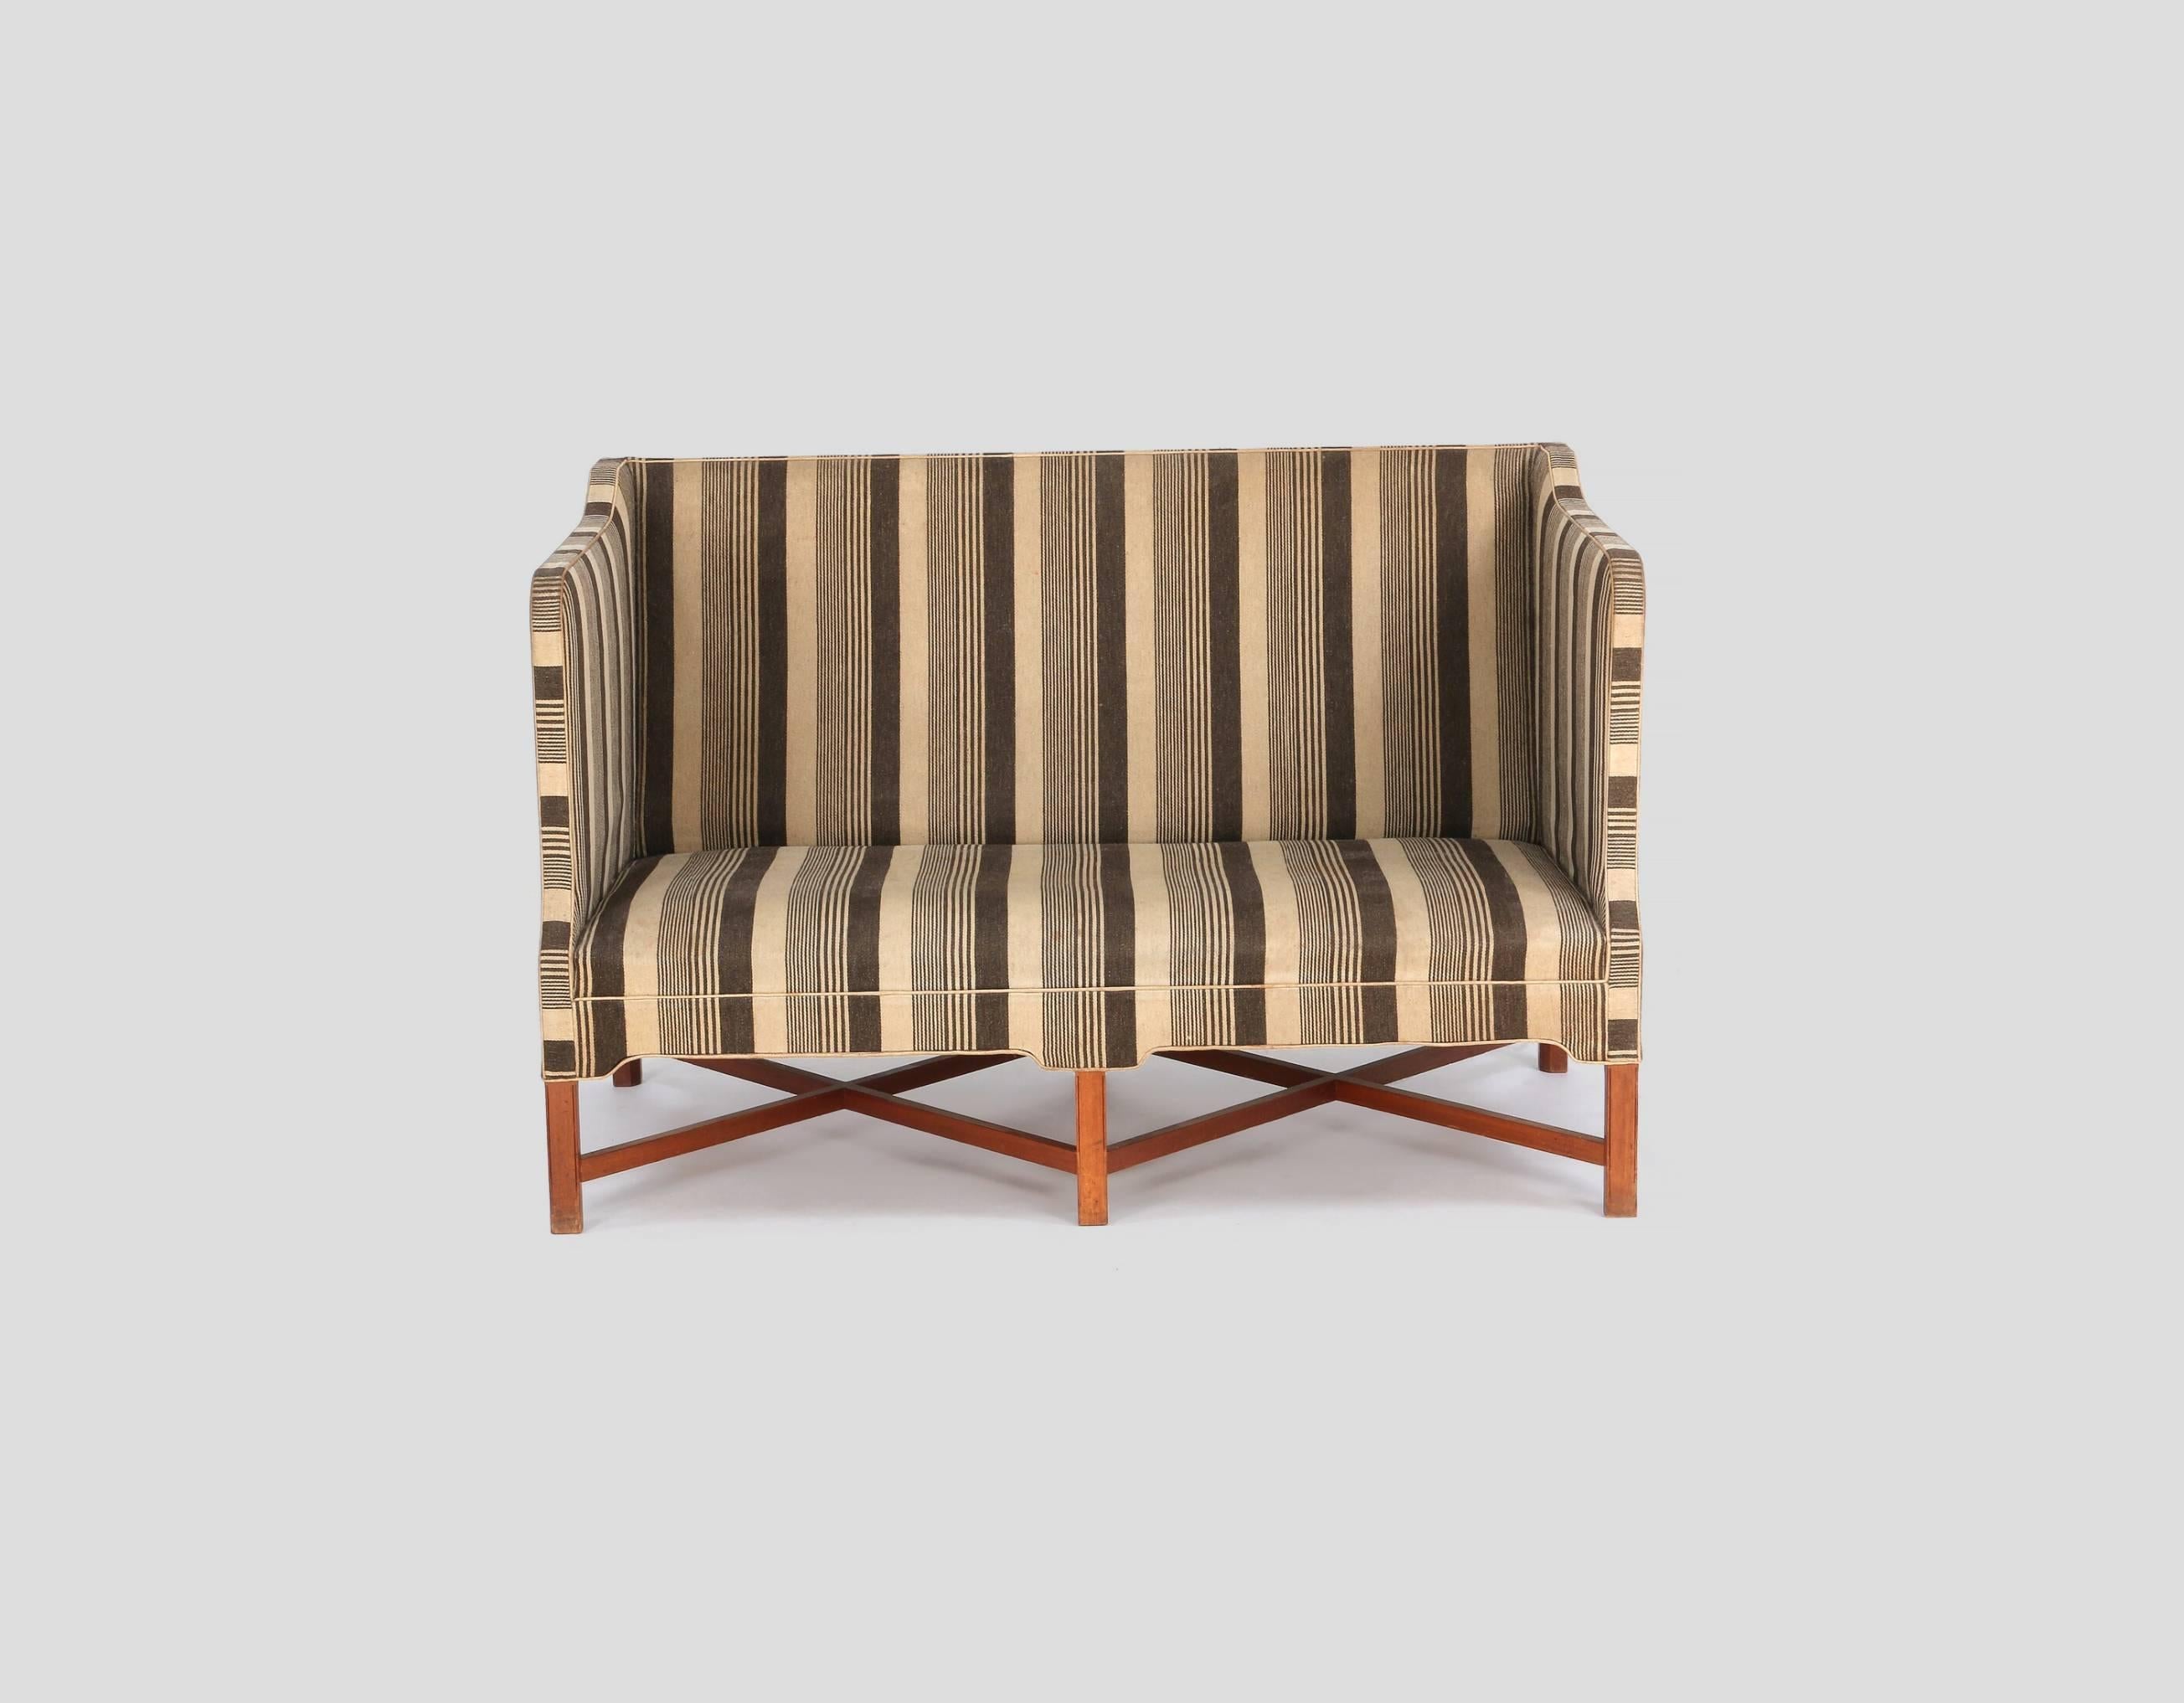 Rare Kaare Klint Model 4118 two-seat box sofa with profiled cross legged mahogany frame. Made by Rud Rasmussen, Copenhagen, Denmark. The fabric has some stains and minor holes so the sofa is offered with complimentary re-upholstery in customer